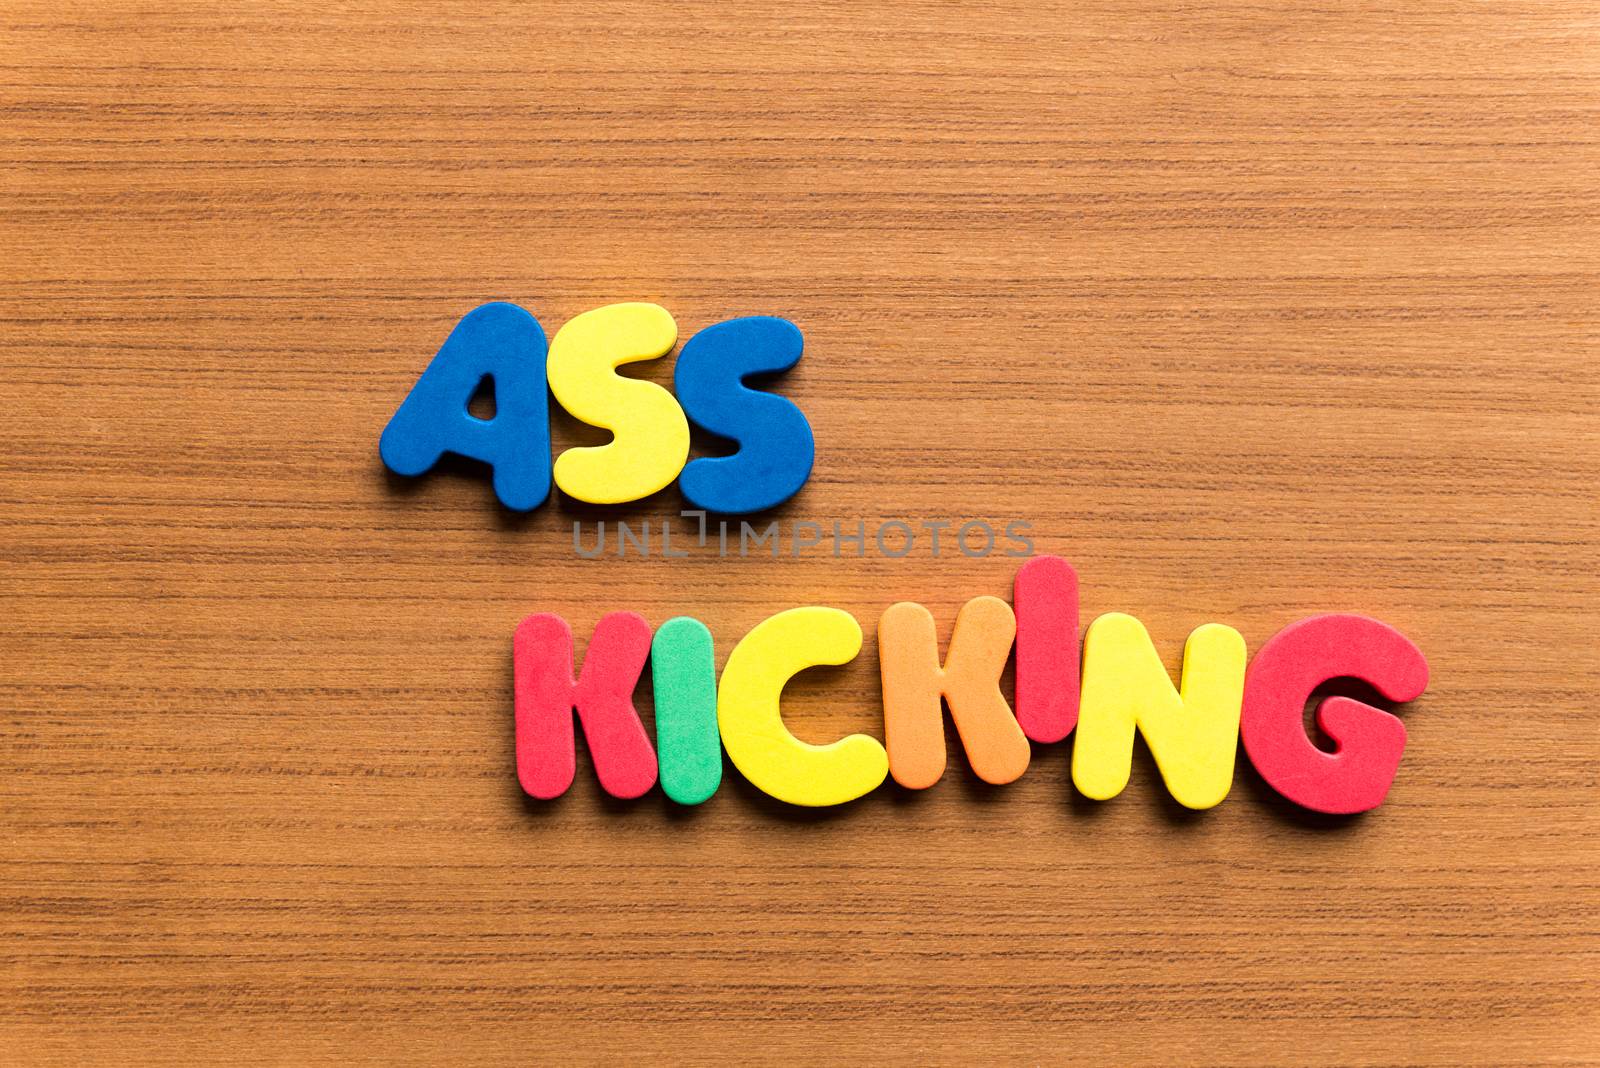 ass kicking colorful word on the wooden background